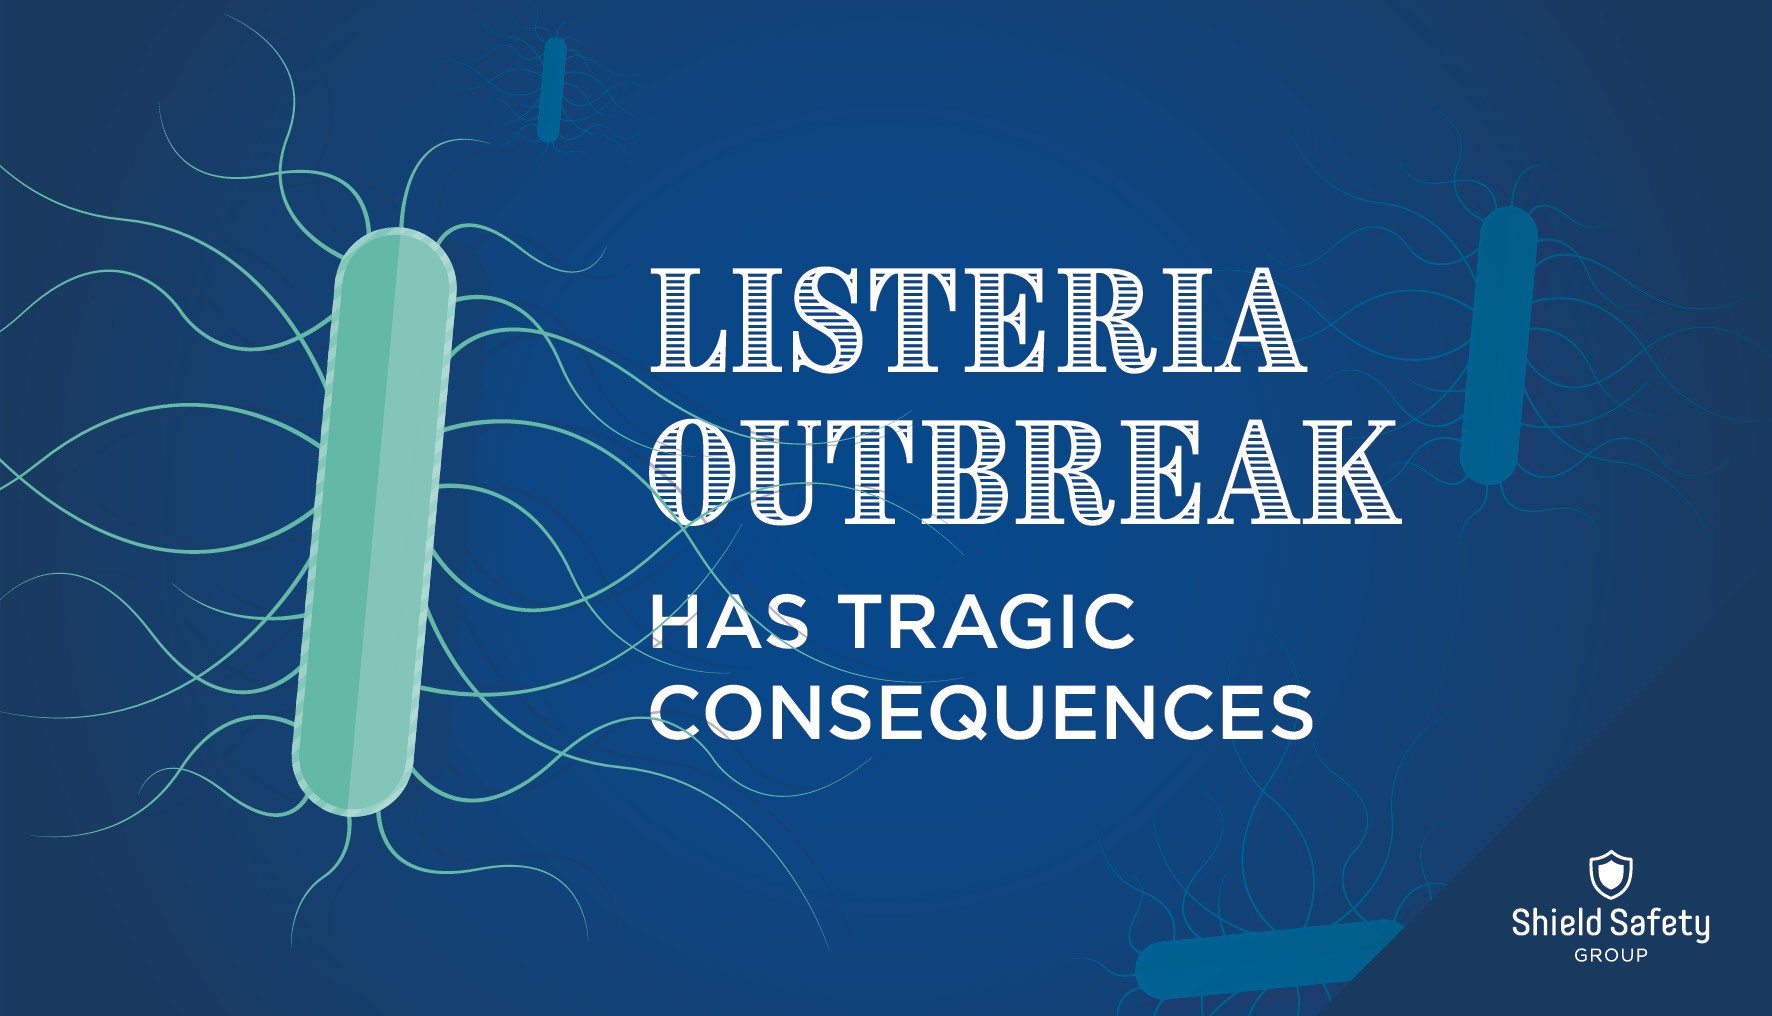 Listeria outbreak has tragic consequences Shield Safety